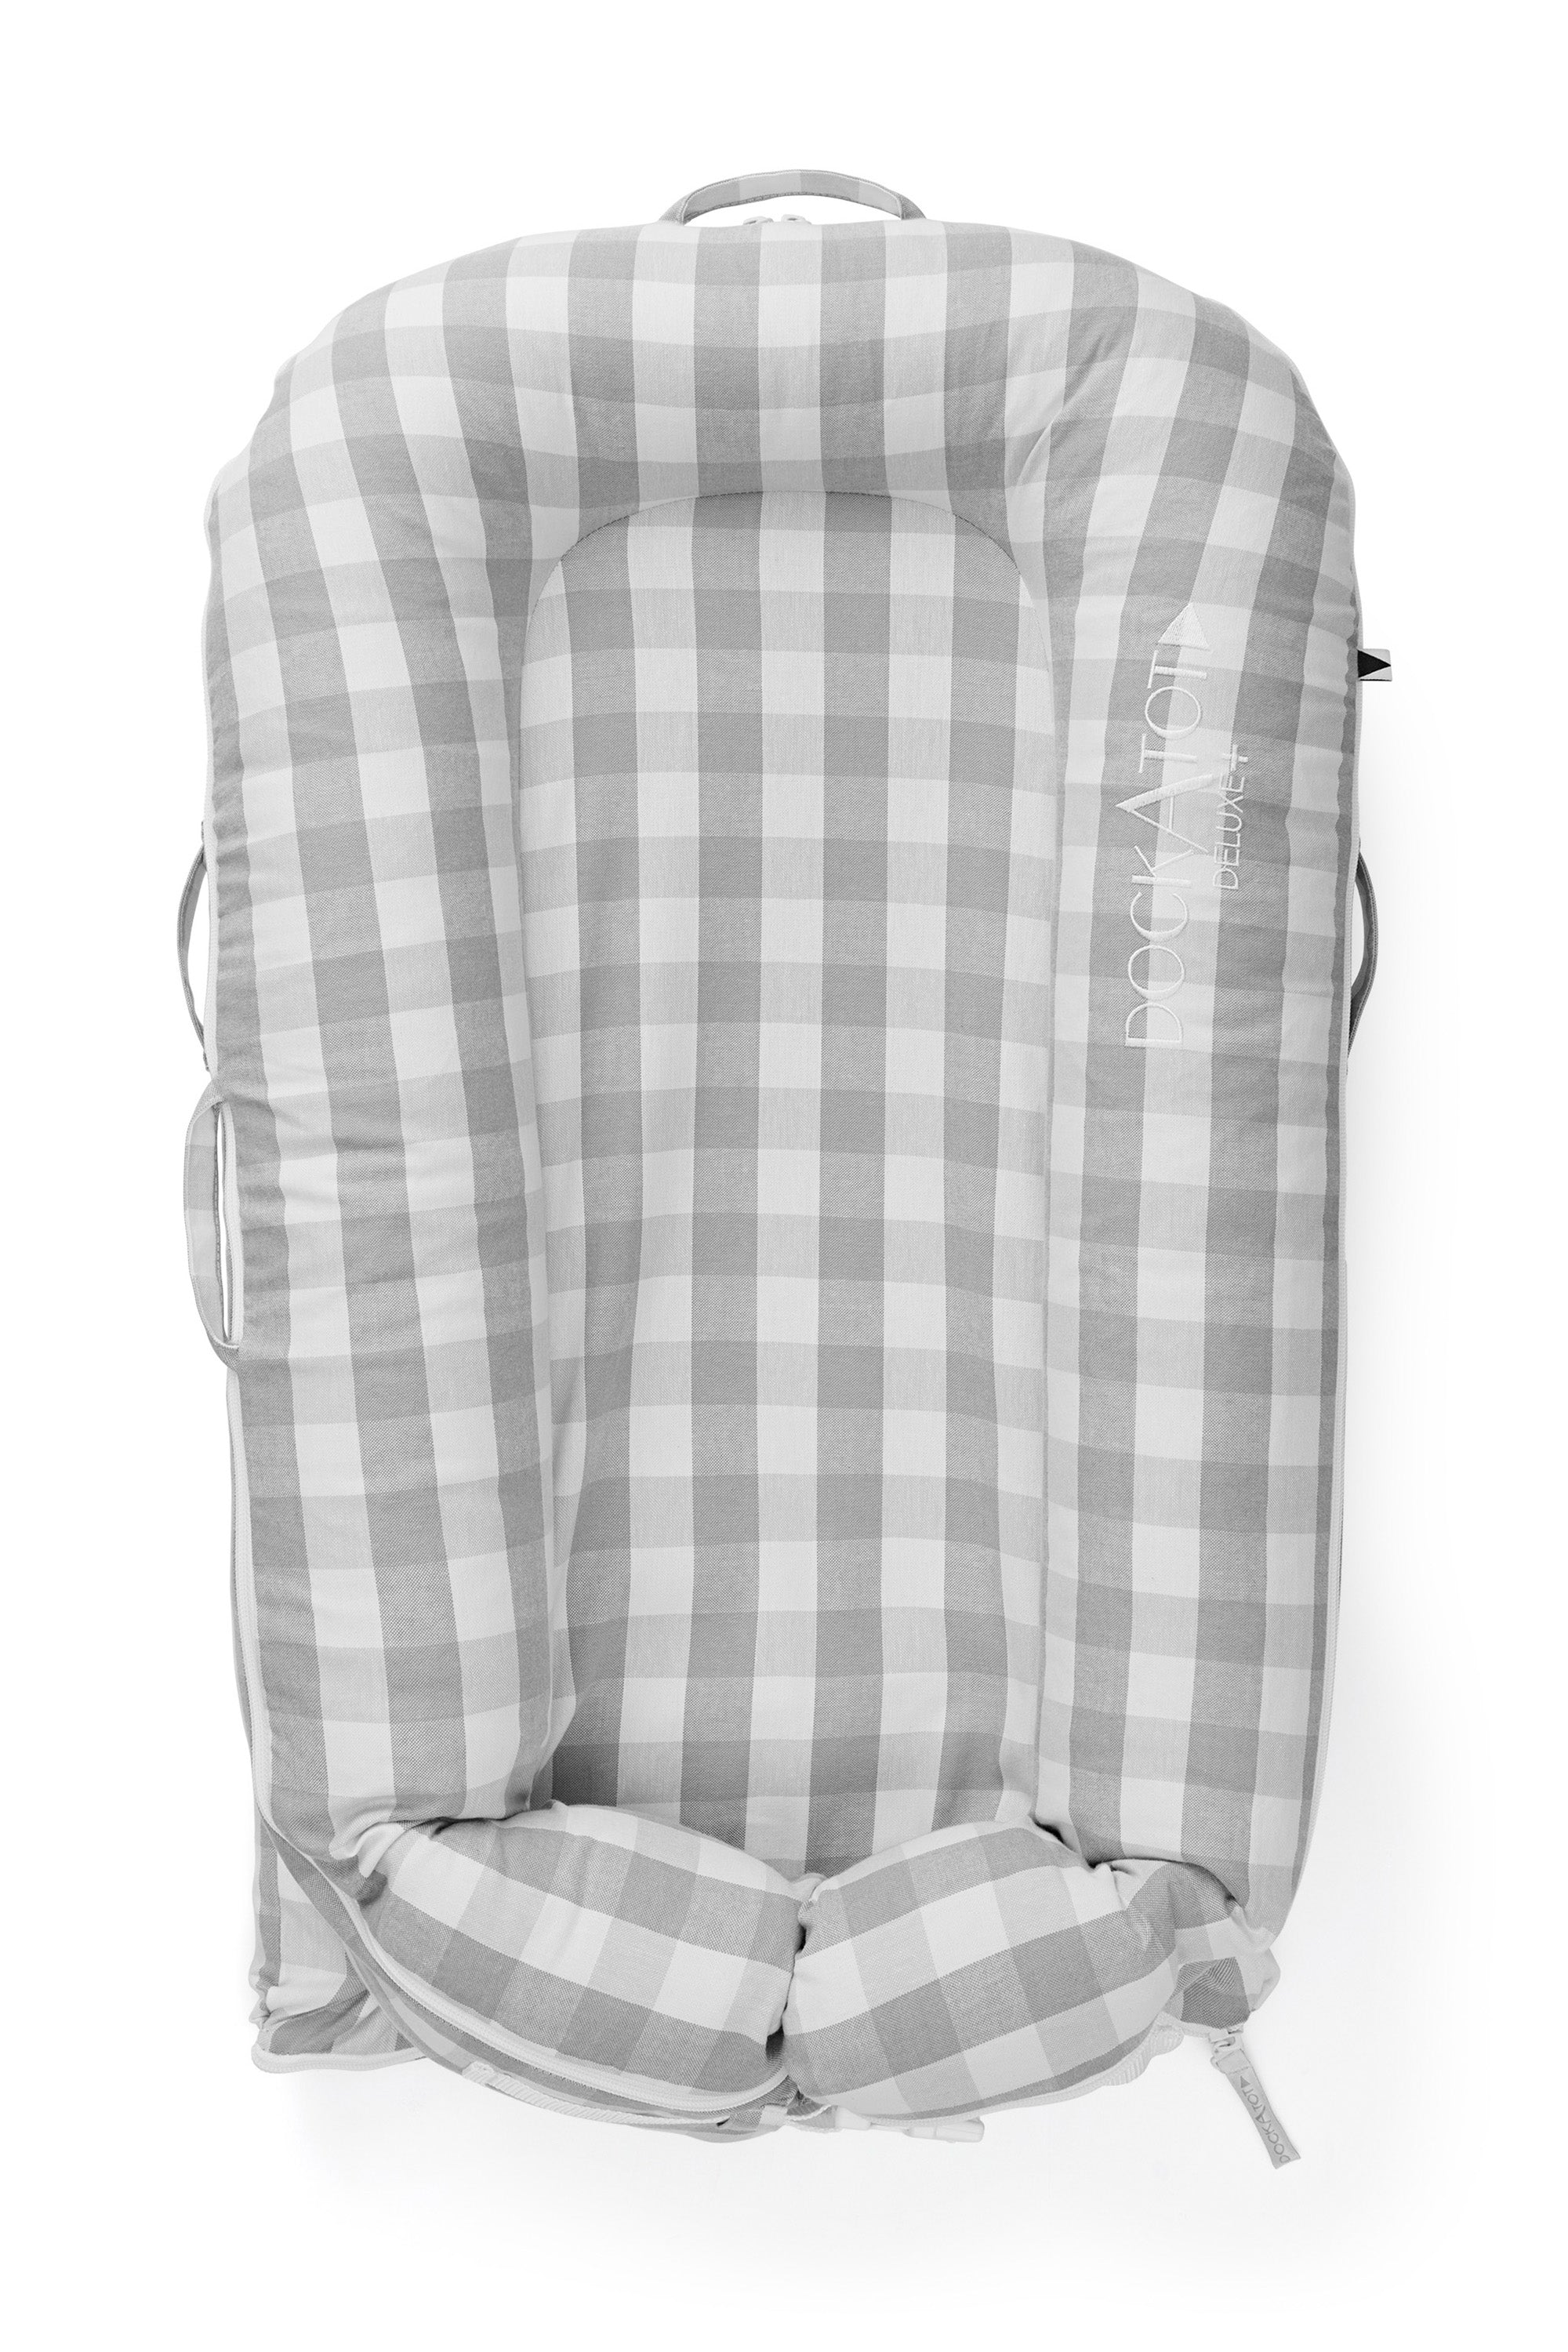 DockATot Deluxe+ Baby Nest Stone Gingham - Out of Stock